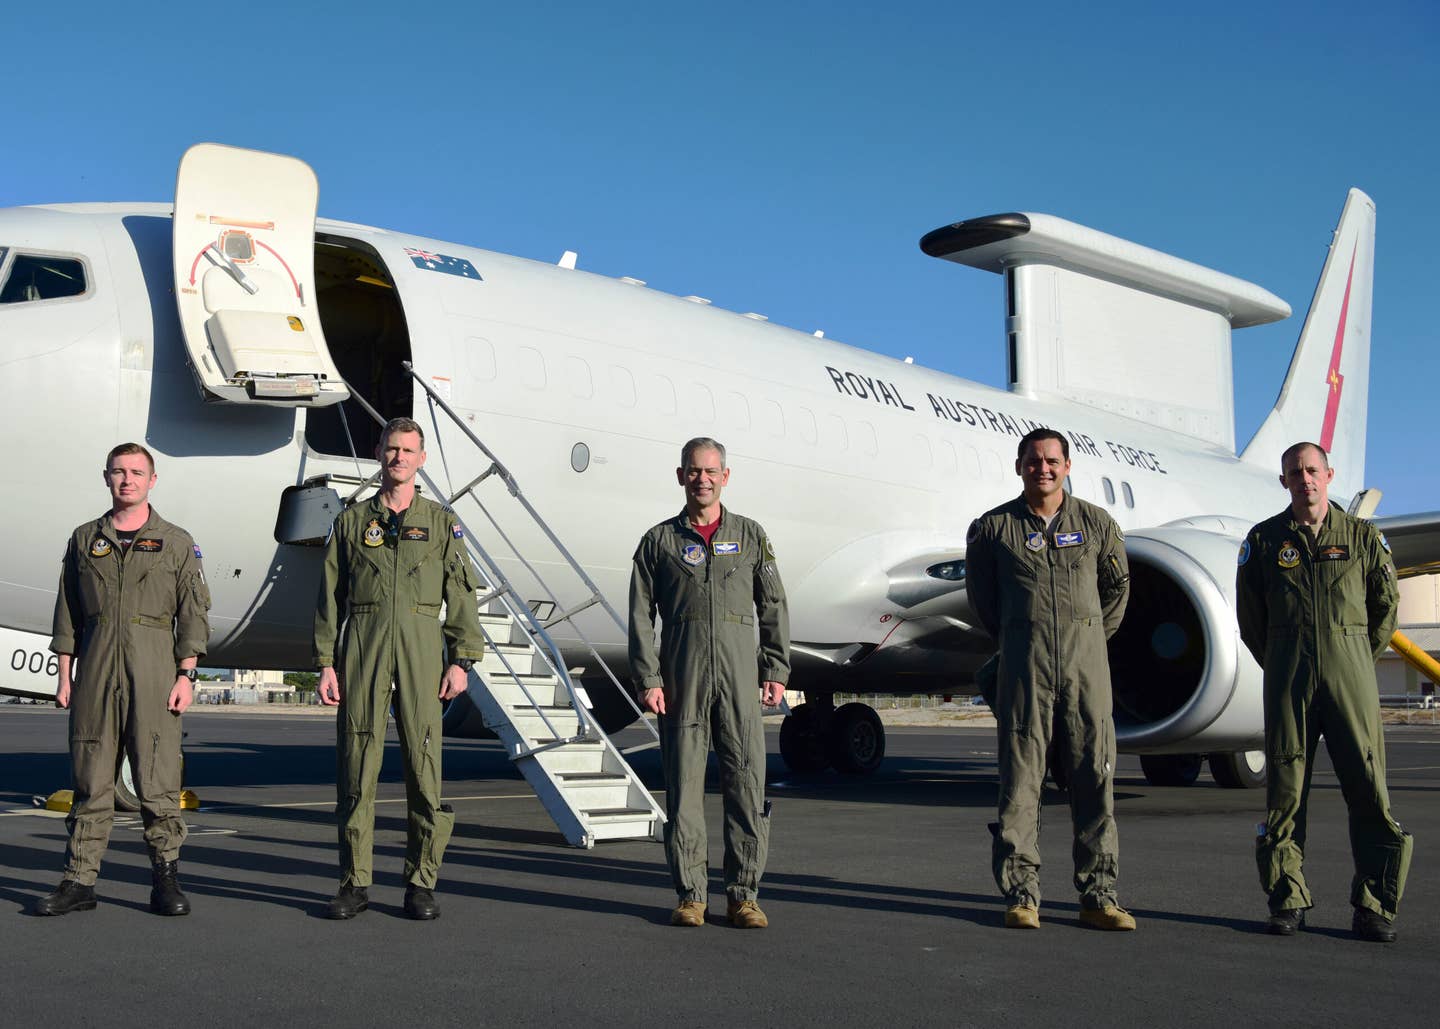 U.S. Air Force Gen. Ken Wilsbach, center, Pacific Air Forces commander, stands with crew members of an Australian E-7 Wedgetail aircraft at Joint Base Pearl Harbor-Hickam, Hawaii, April 16, 2021. The Wedgetail is an airborne early warning and control platform which provides the Australian Military with advanced air battlespace capabilities. (U.S. Air Force photo by Tech. Sgt. Jimmie D. Pike)